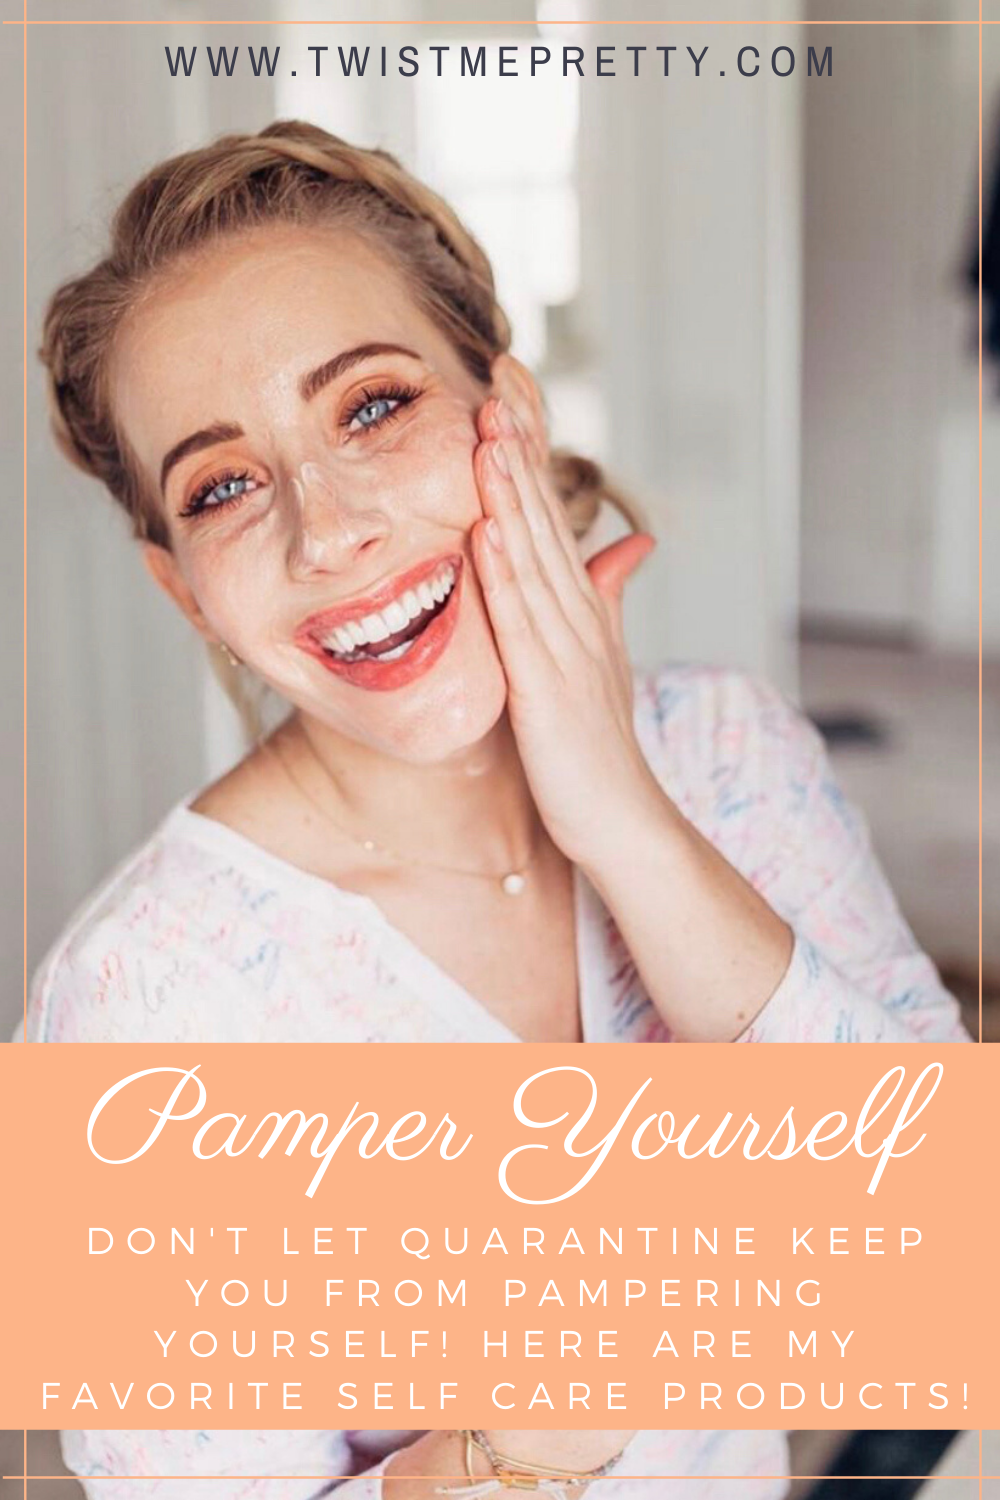 Pamper Yourself! Don't let quarantine keep you from pampering yourself. Here are my favorite products for self care at home. www.twistmepretty.com